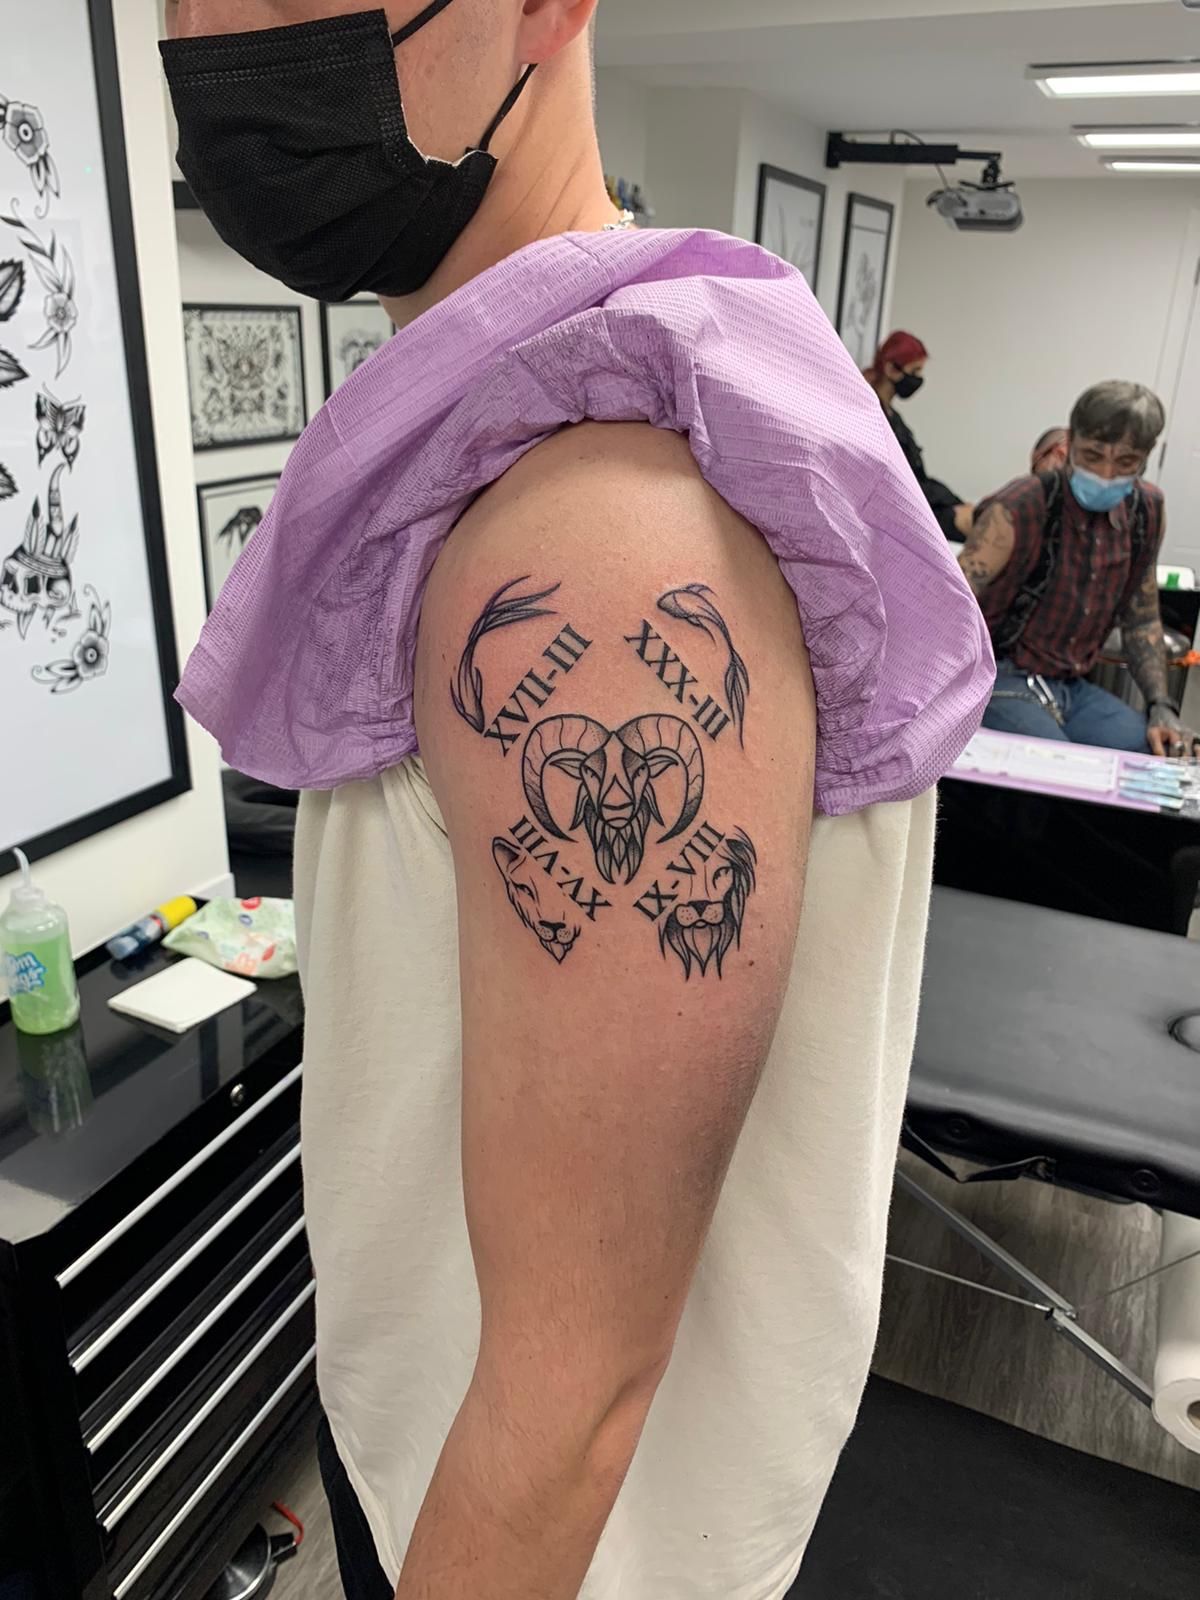 What is the best tattoo design for your zodiac sign?